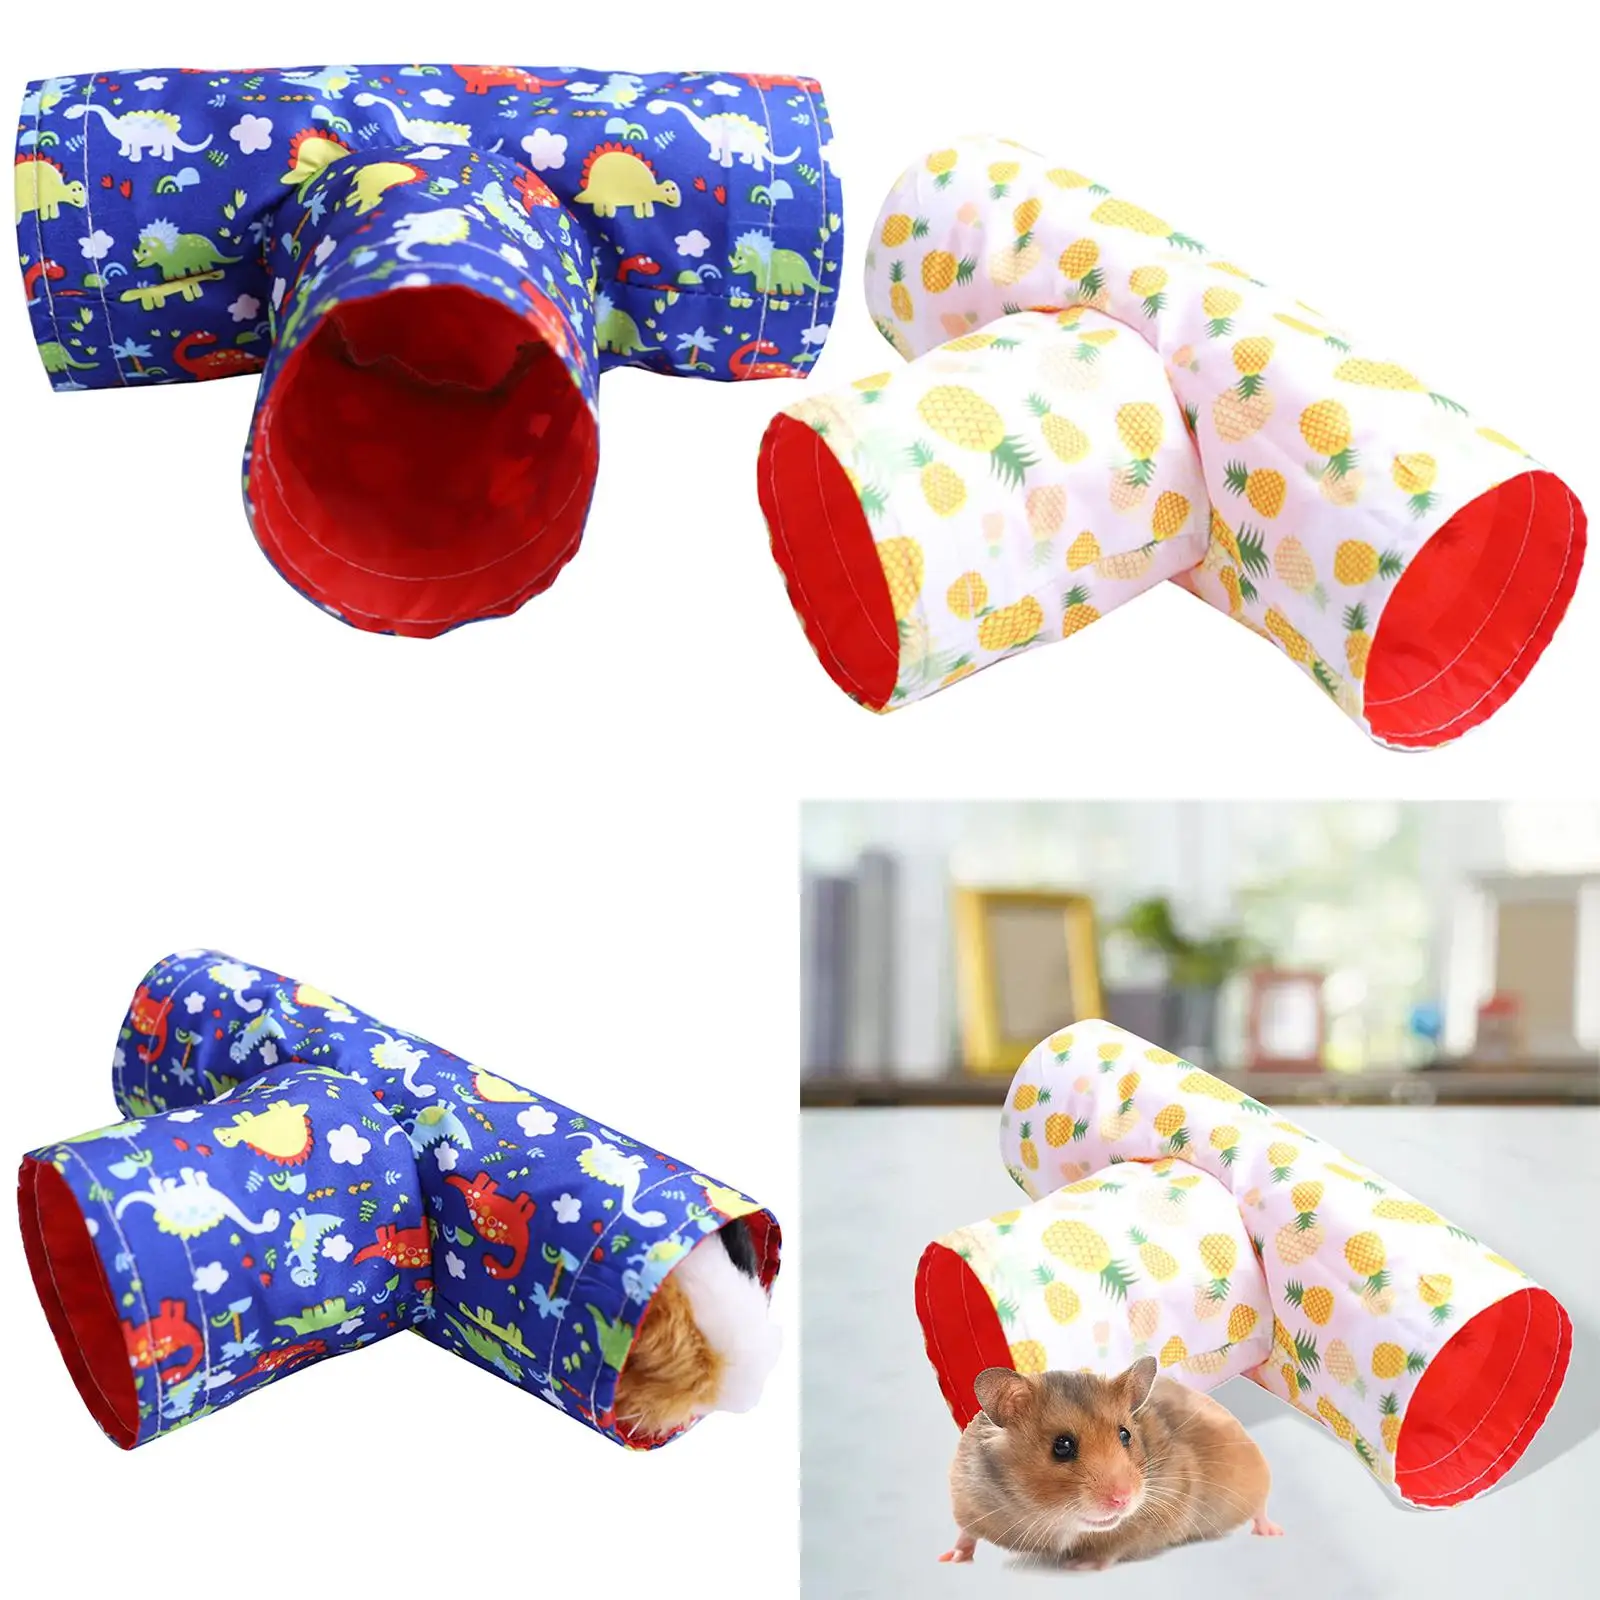 Small Animals Pet Guinea Pig Tunnels Cage Play Toy for Hamster Gerbil Rat